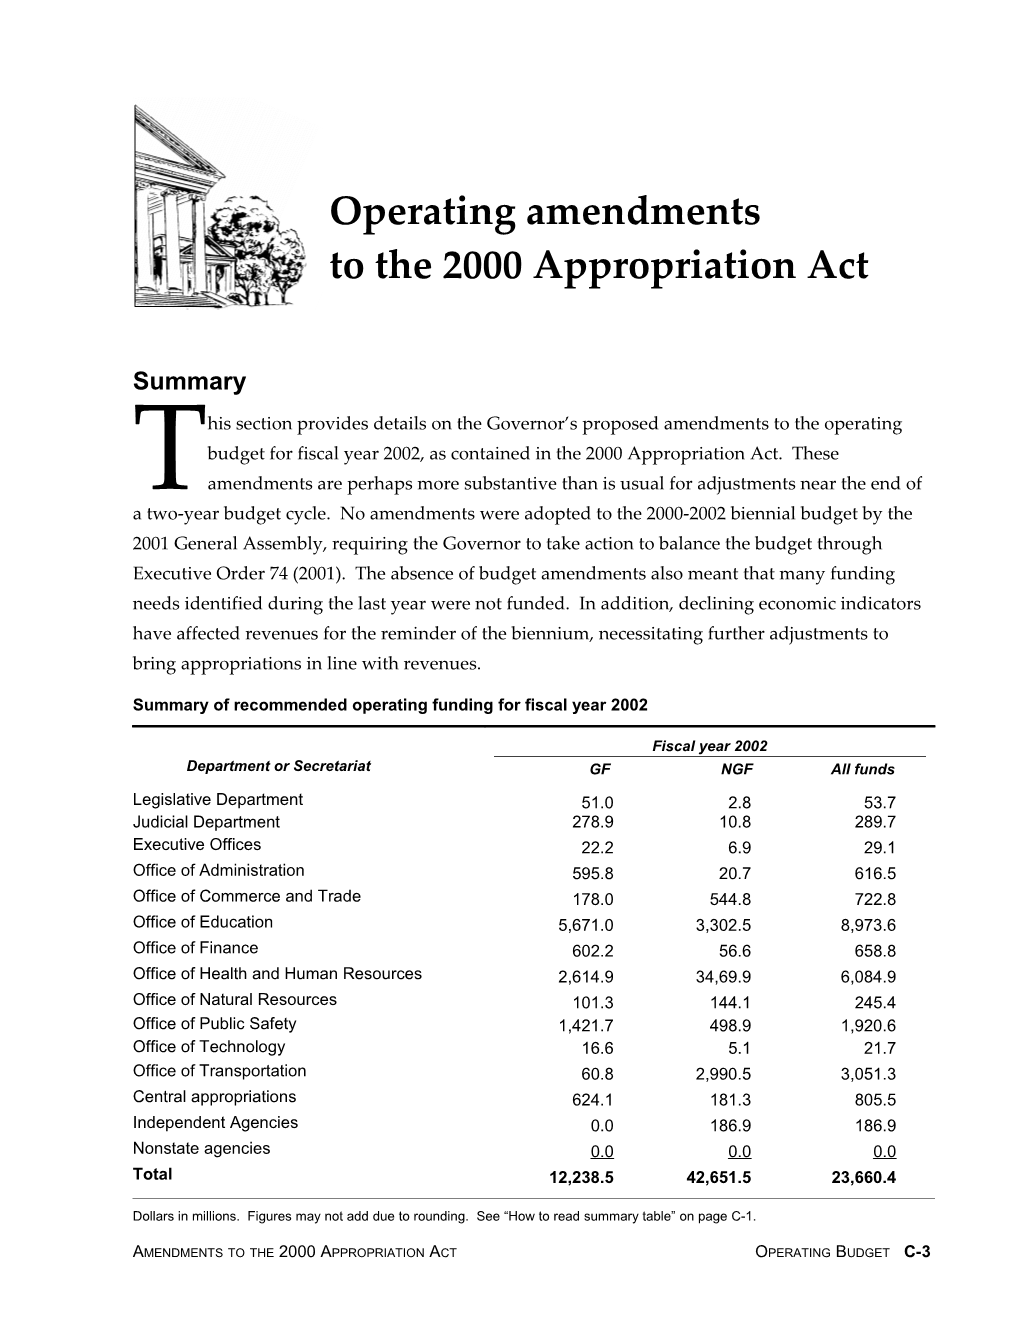 Operating Amendments to the 2000 Appropriation Act